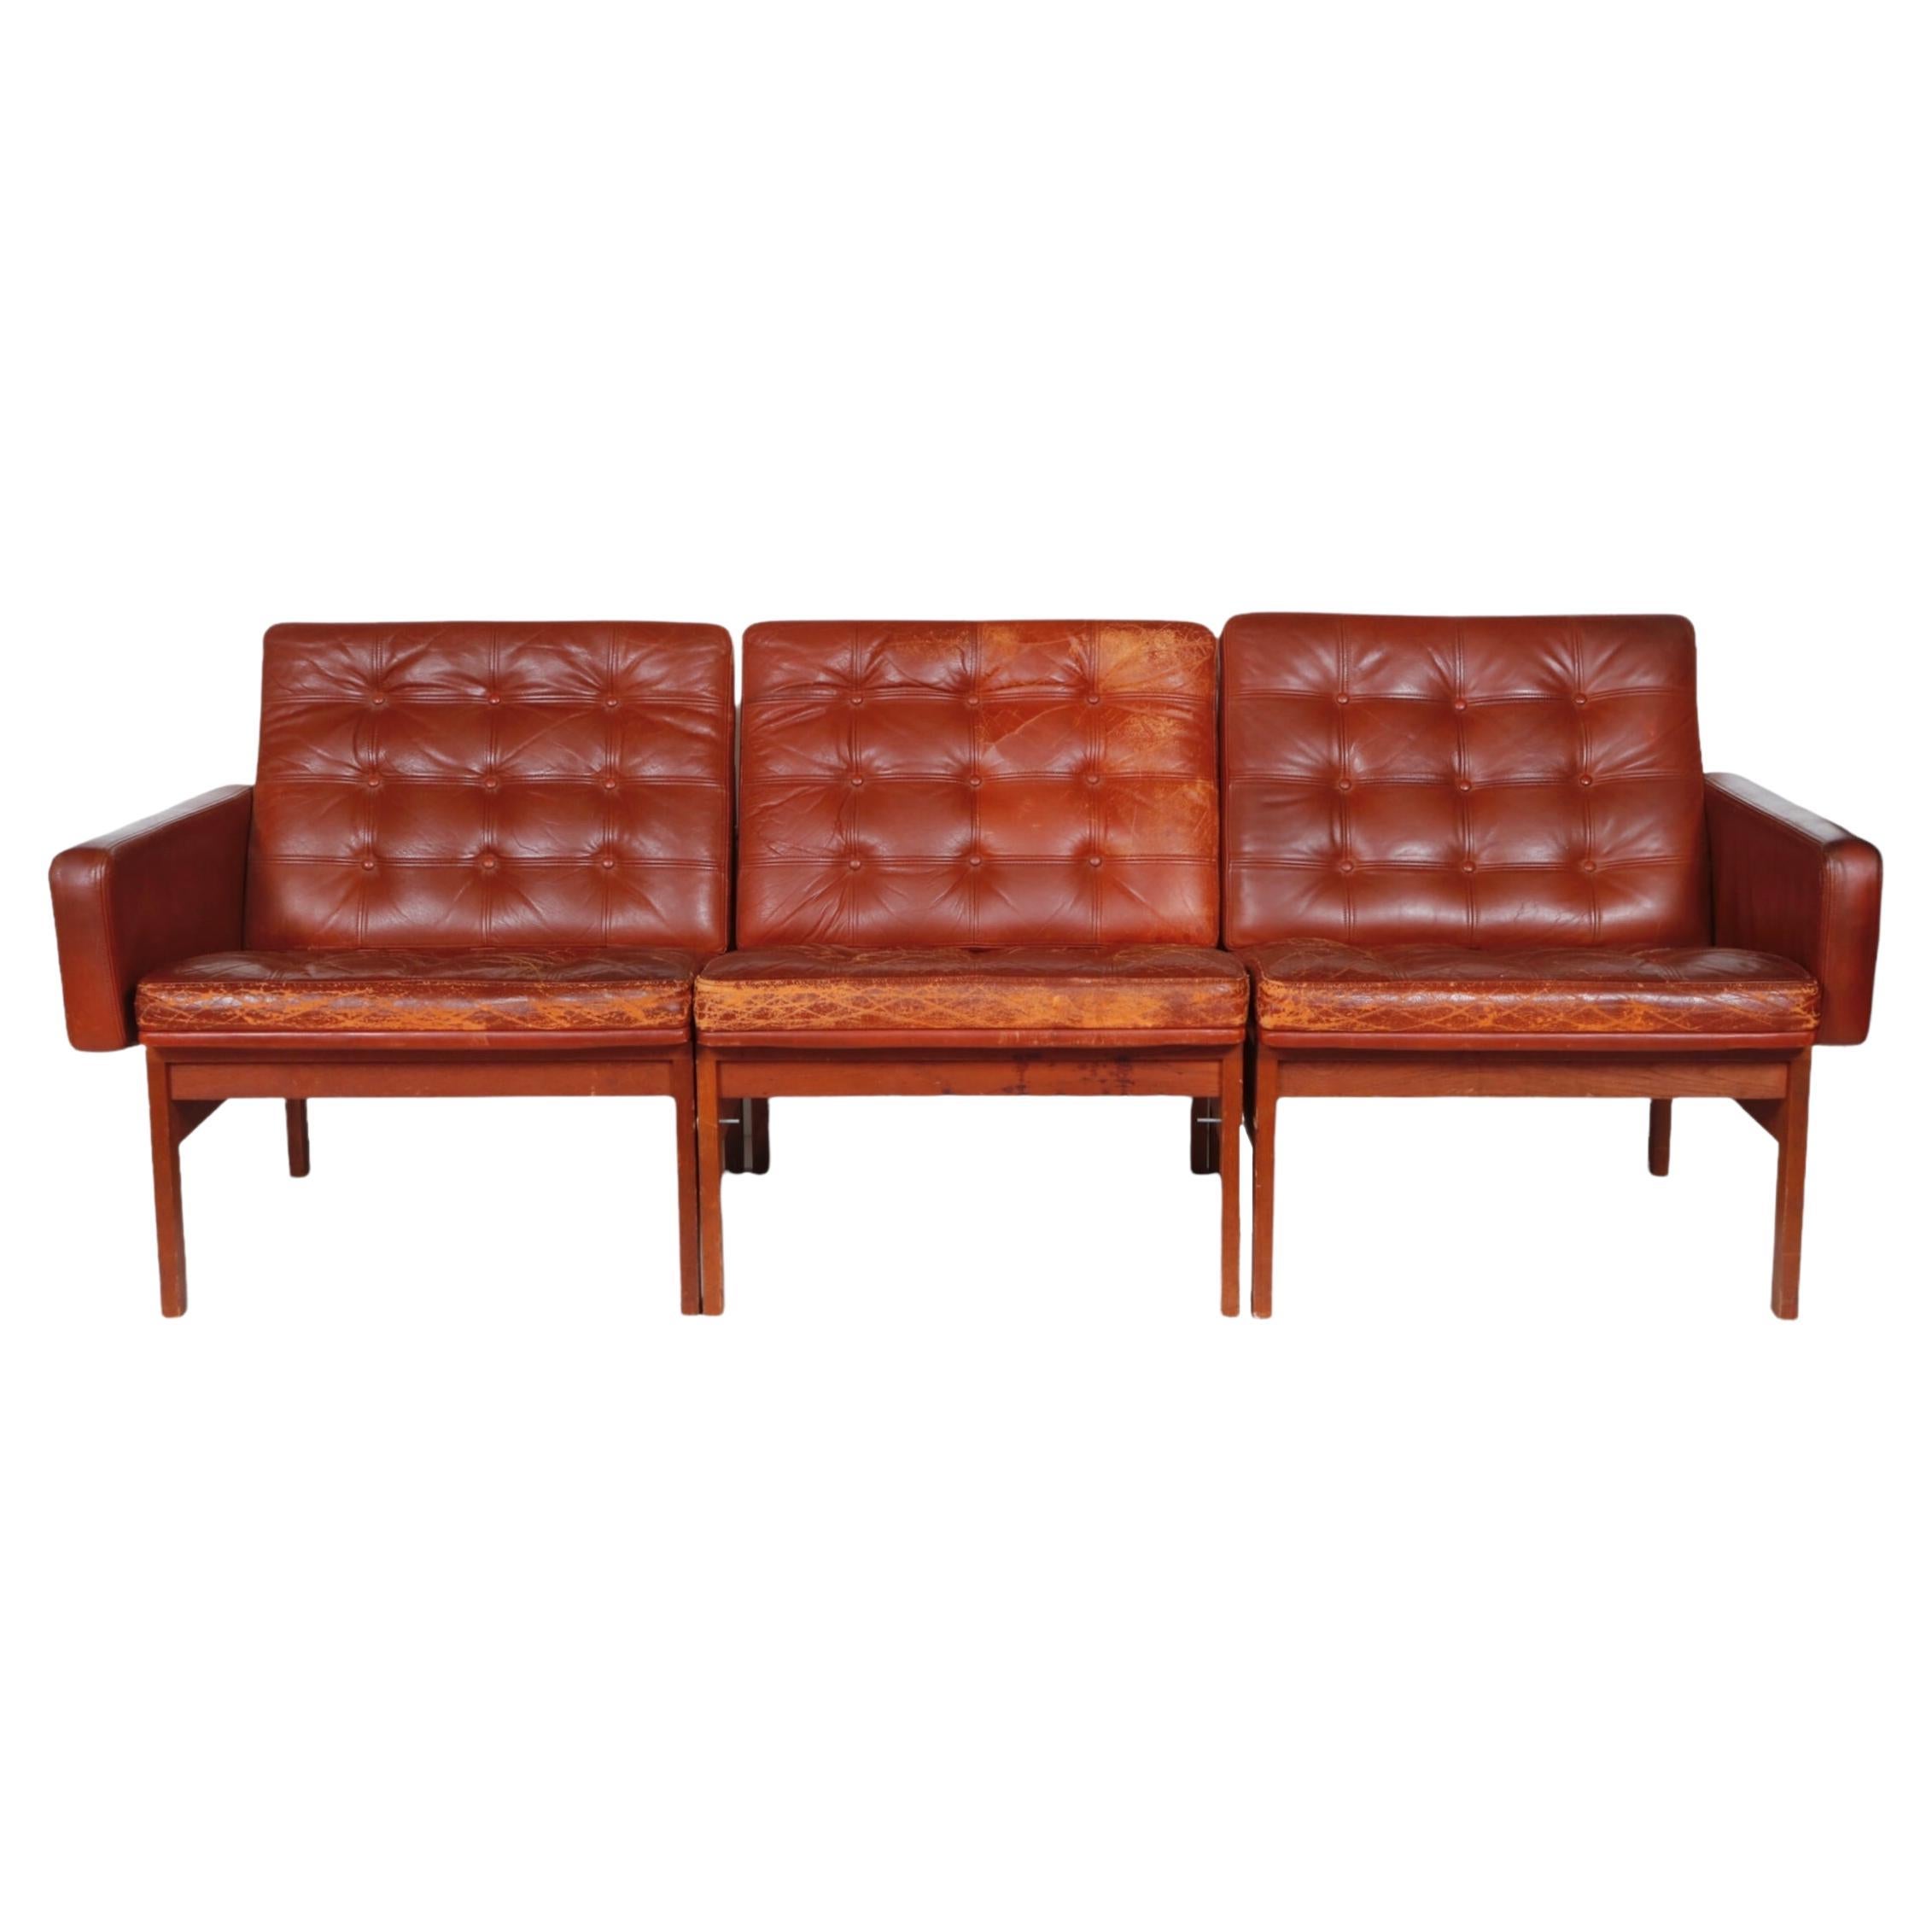 A vintage Moduline collection three-seat sofa designed by Ole Gjerlov-Knudsen & Torben Lind  for France & Son. Denmark, circa 1960.

Signed with France & Son metal tag and marked made in Denmark. 

A period Danish modern sofa in original tufted